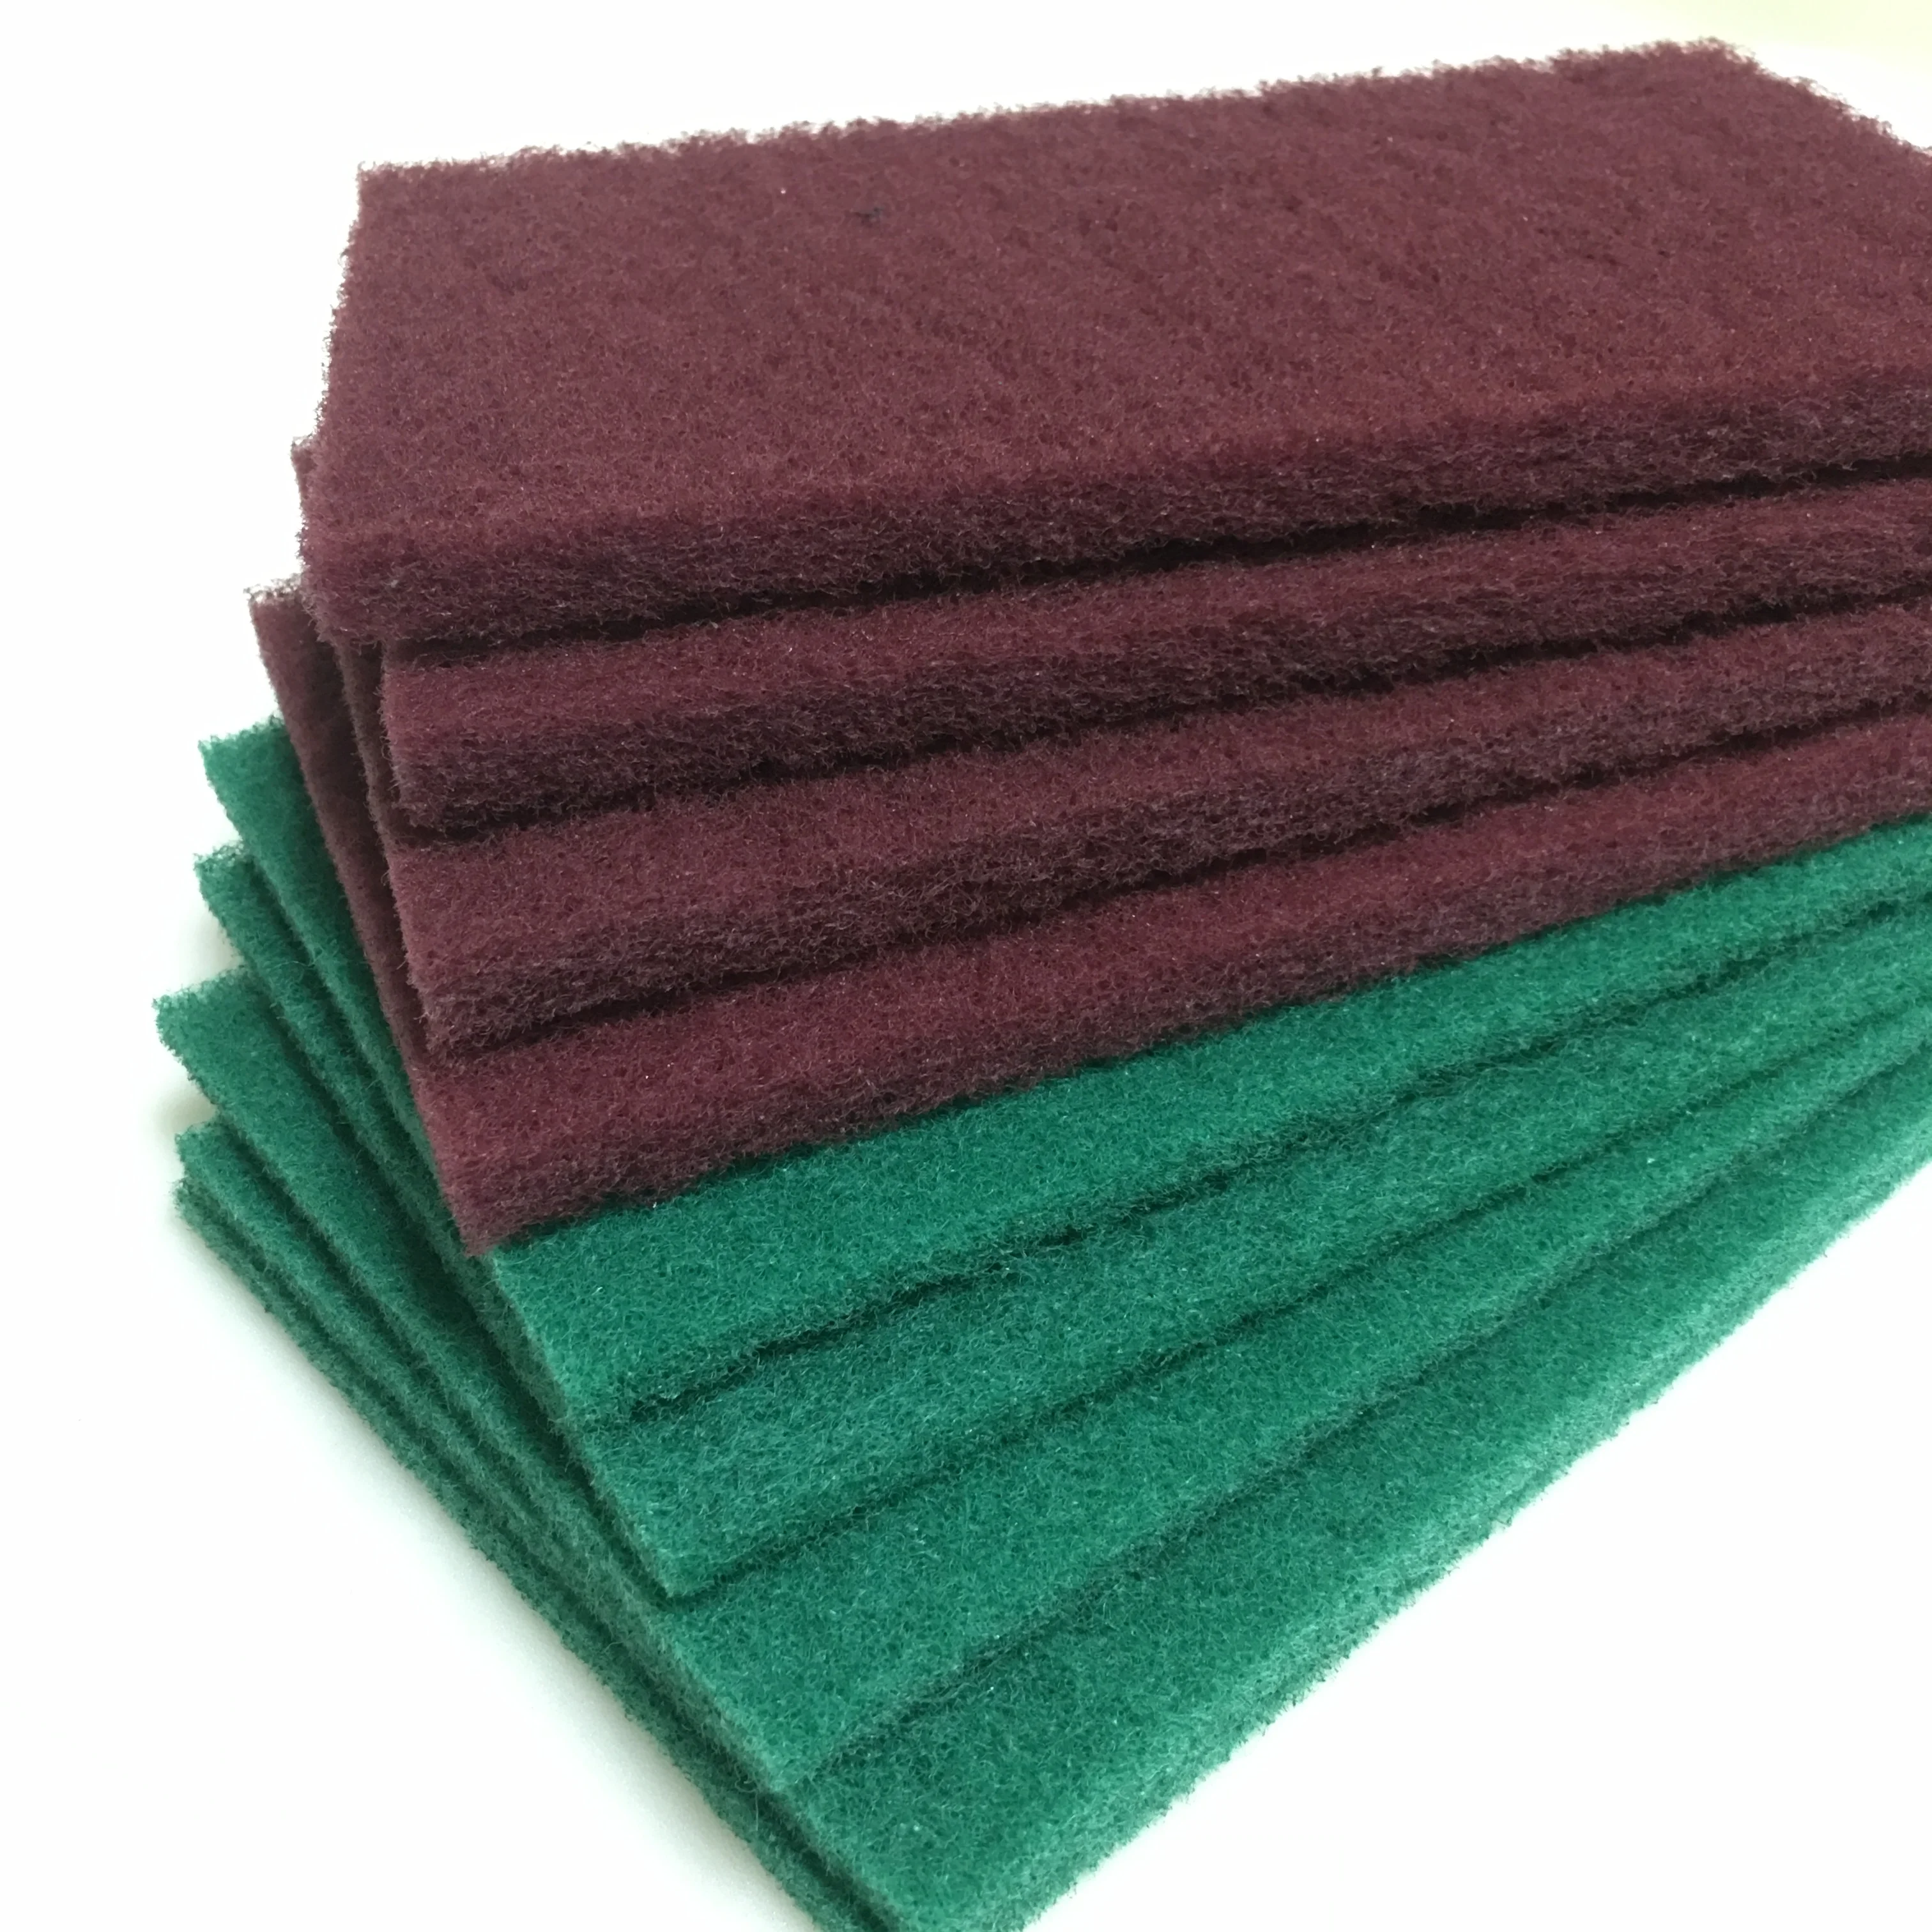 NEW HIGH QUALITY SCOURER SCOURING PAD INDUSTRIAL SCOURER ABRASIVE FINISHING PADS 